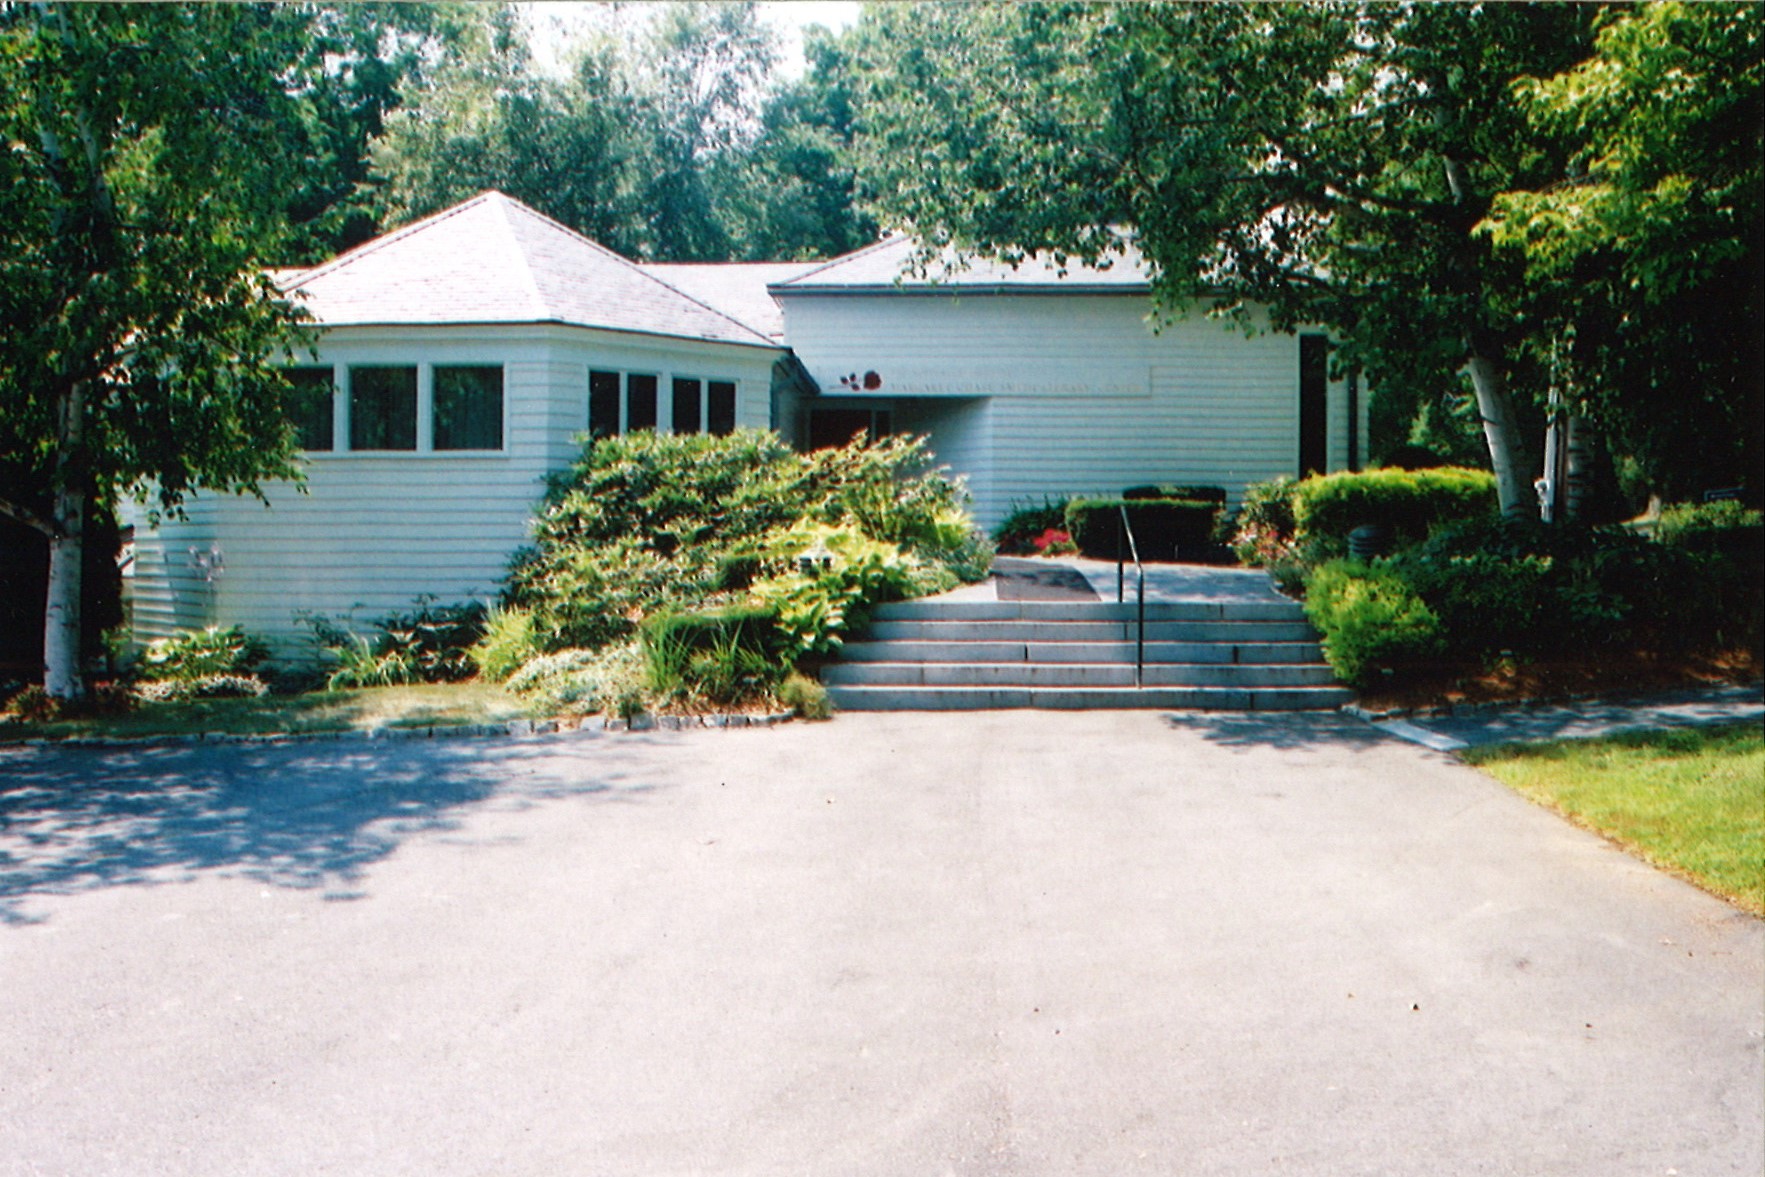 Exterior picture of the Margaret Chase Smith Library in Skowhegan, Maine taken on August 13, 2002 